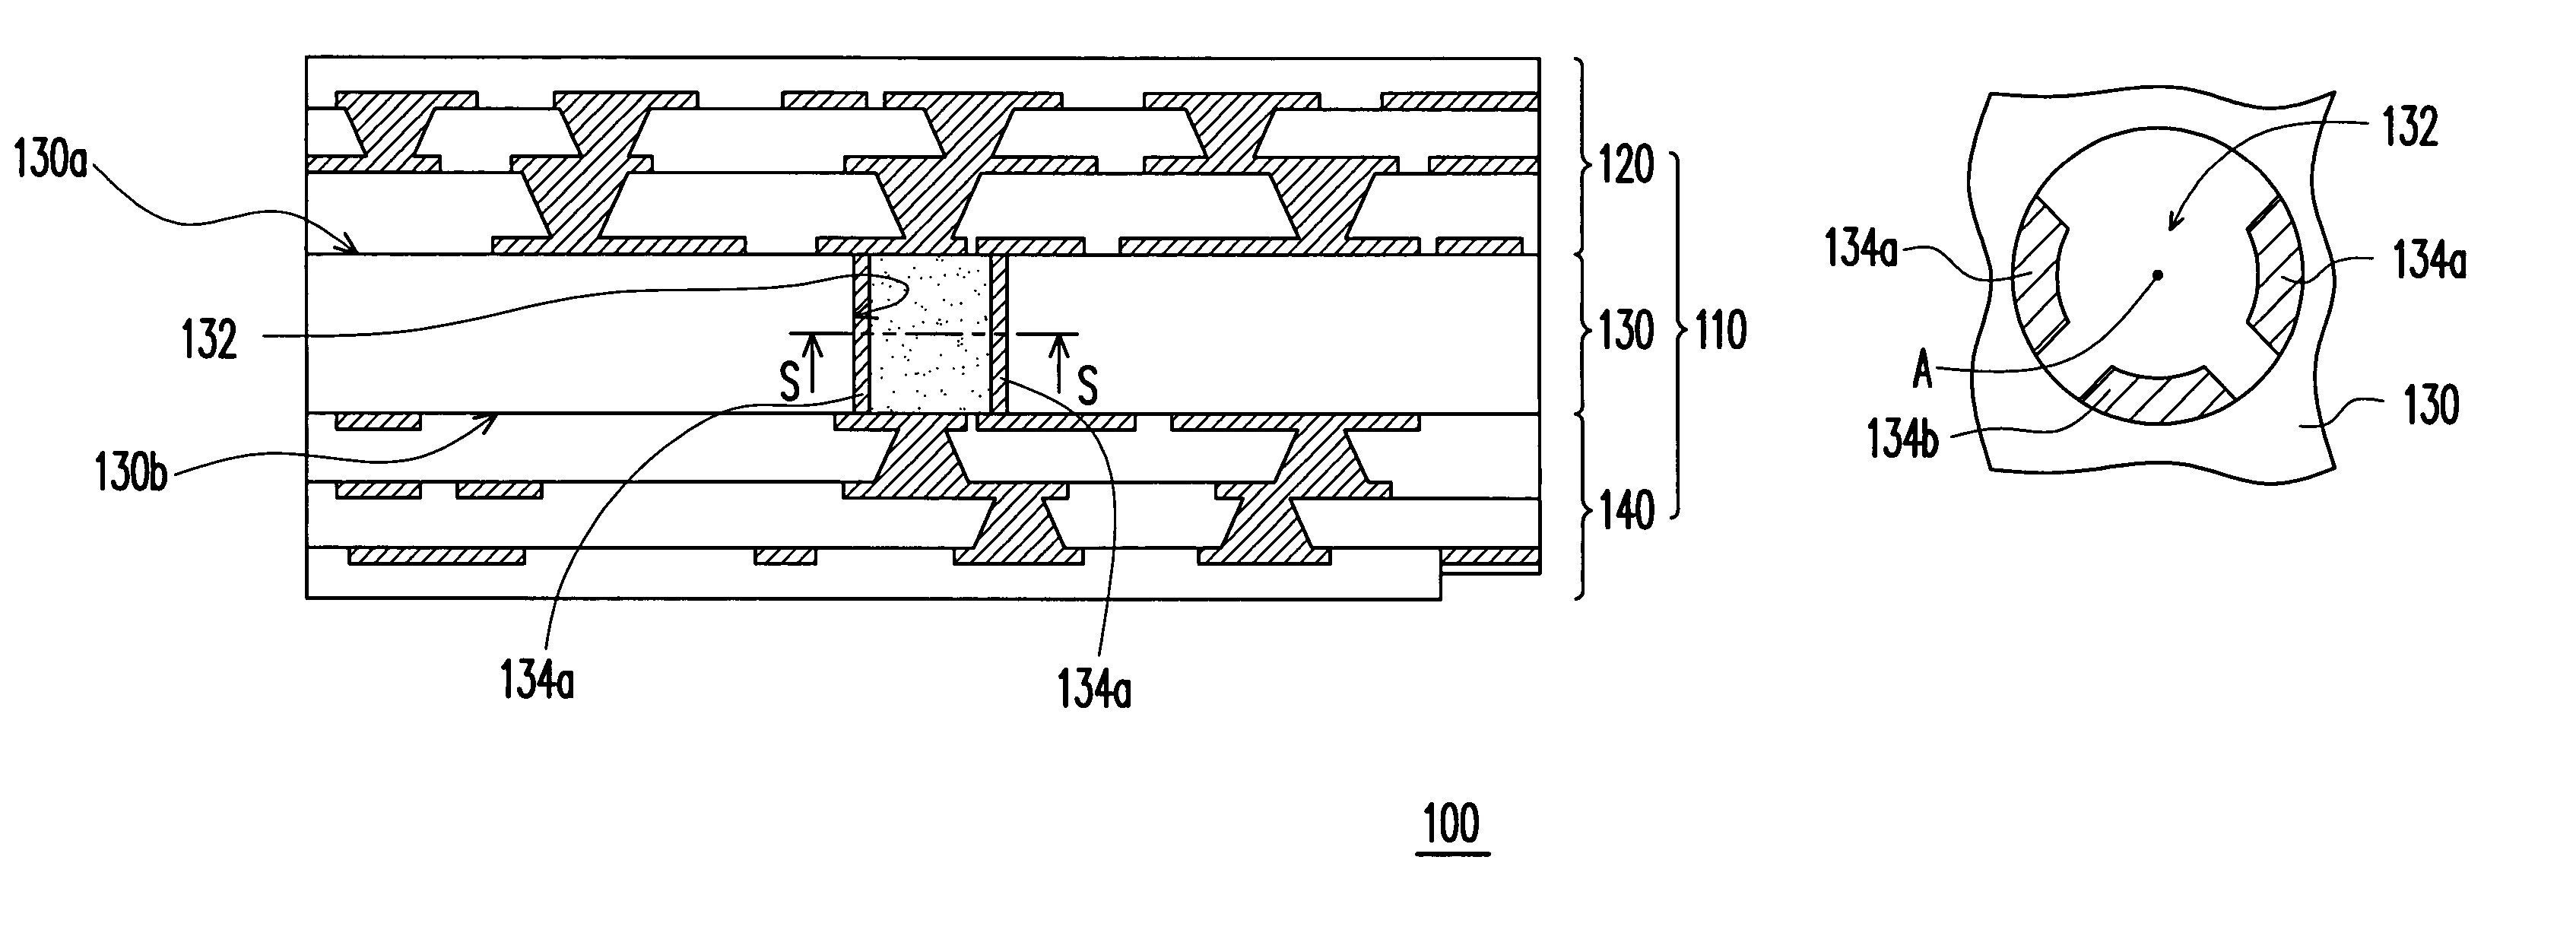 Multi-conducting through hole structure